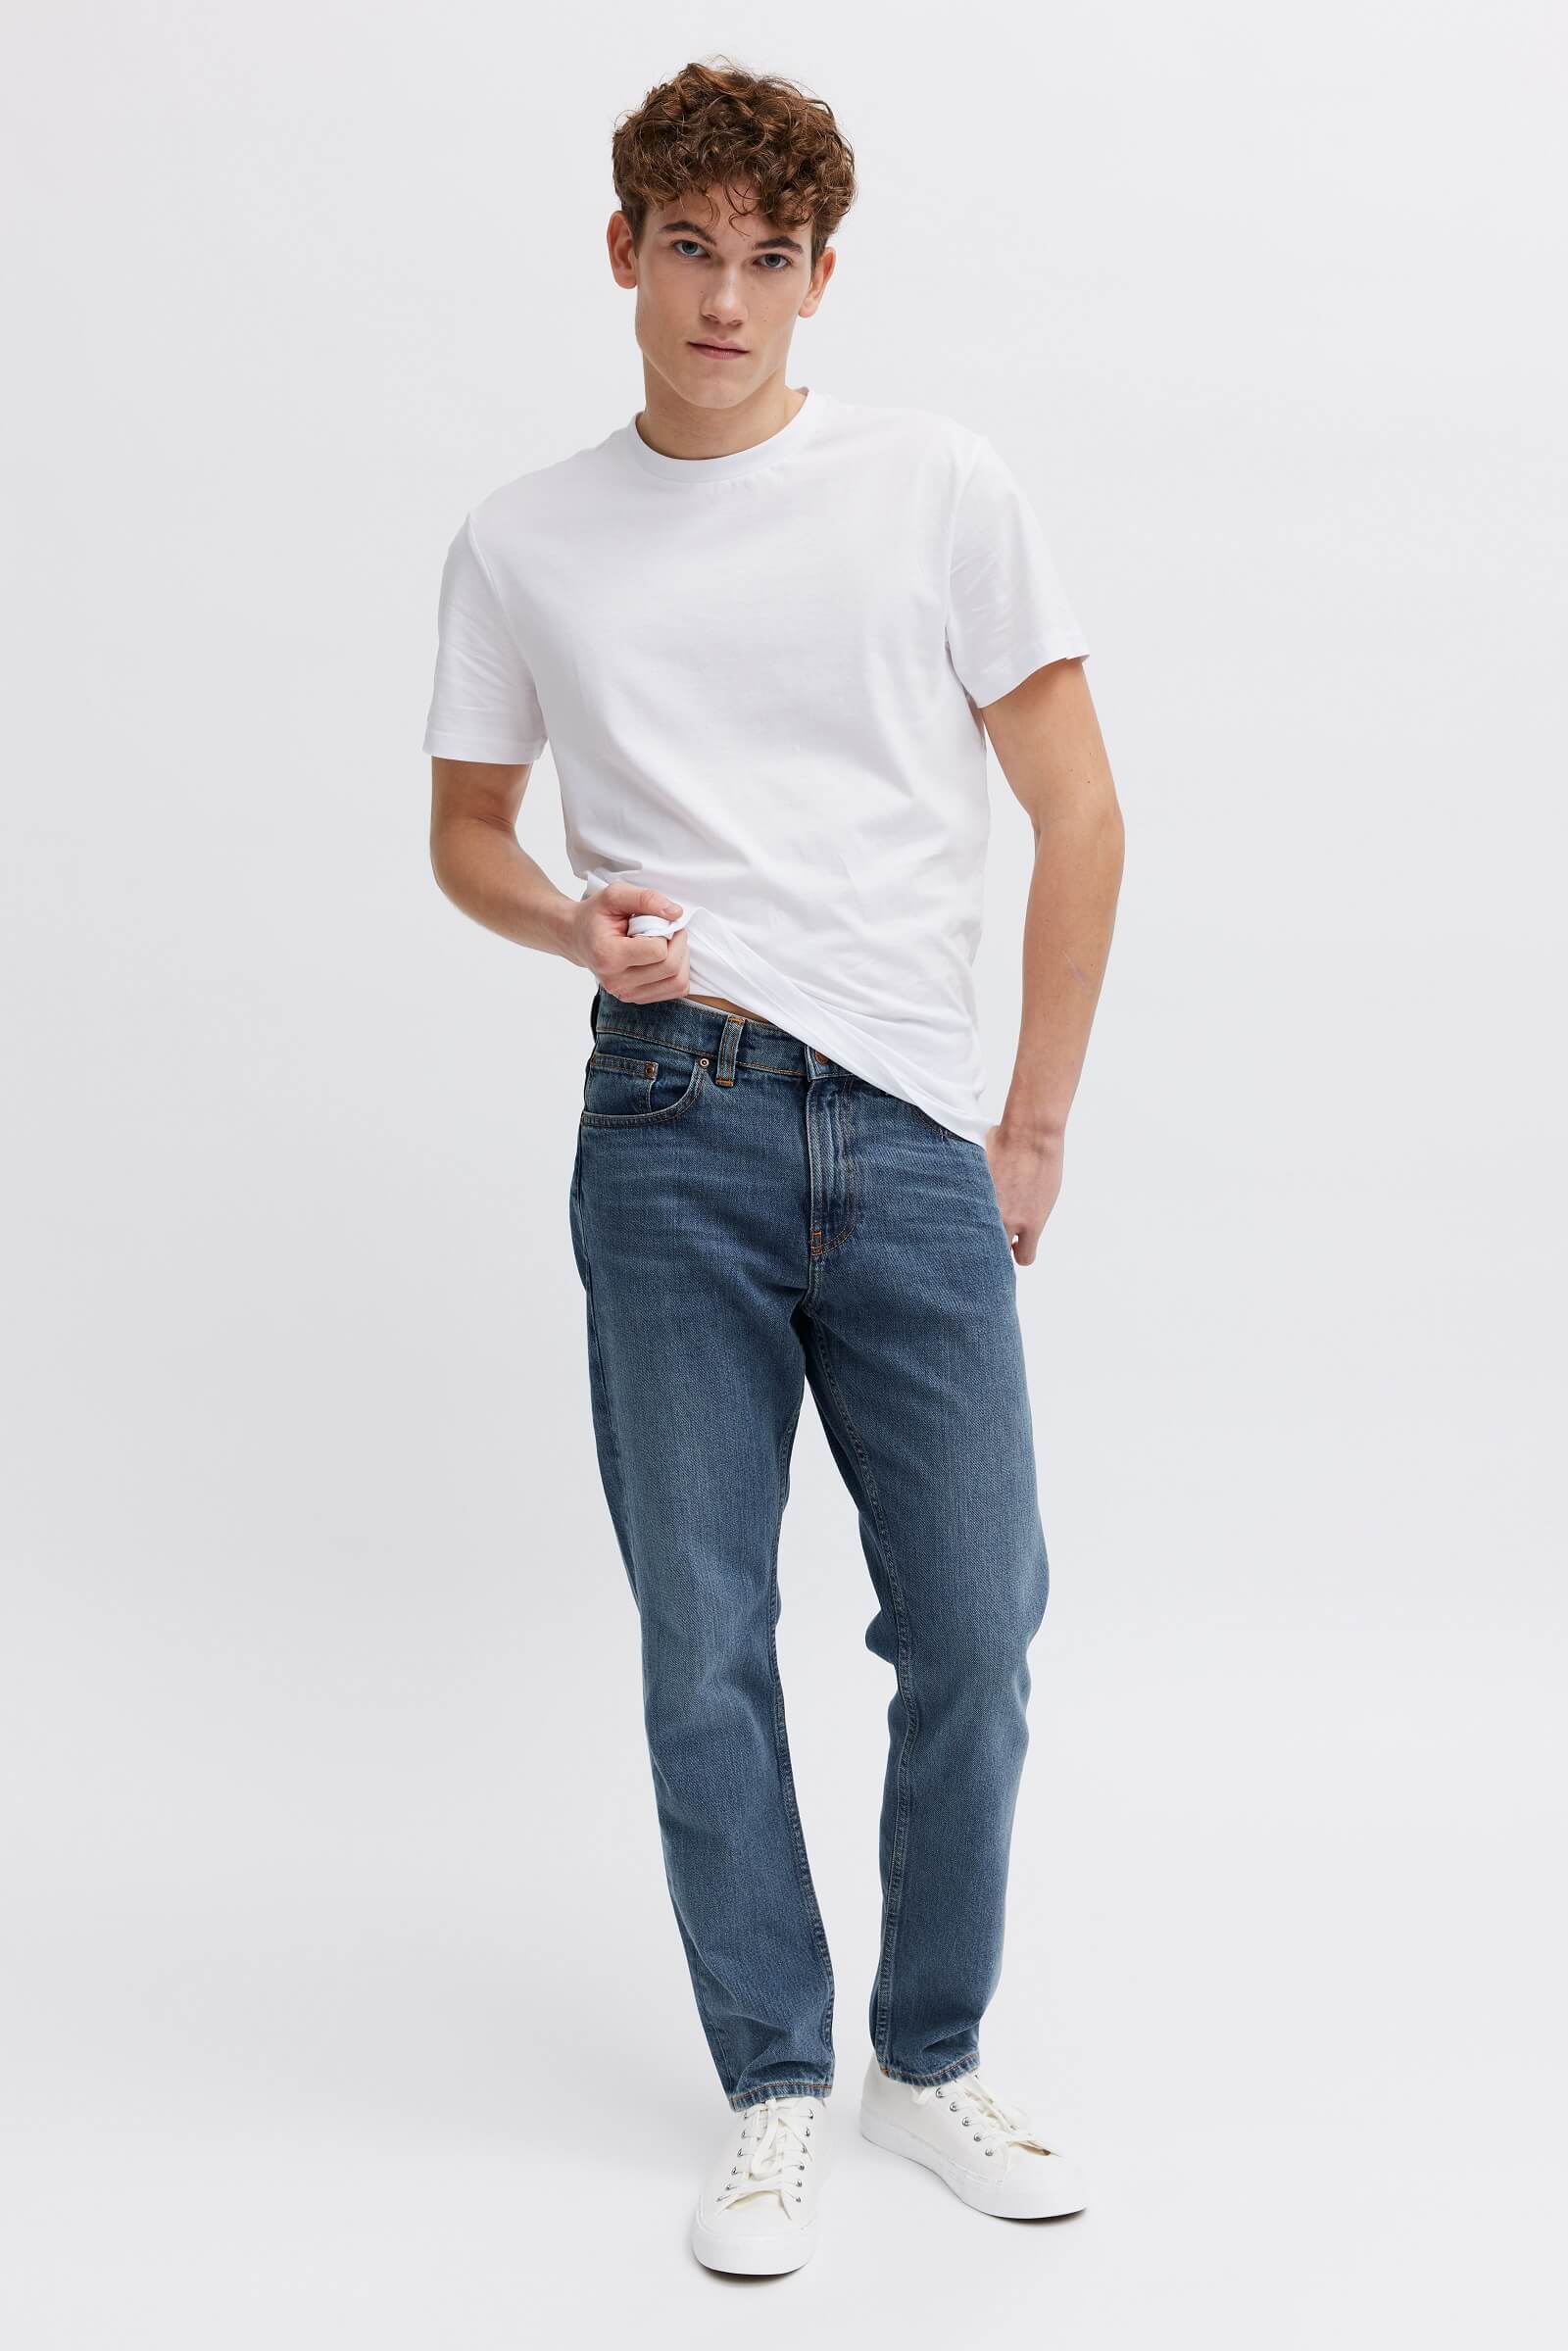 Mid rise, regular fit, ethical & organic pants